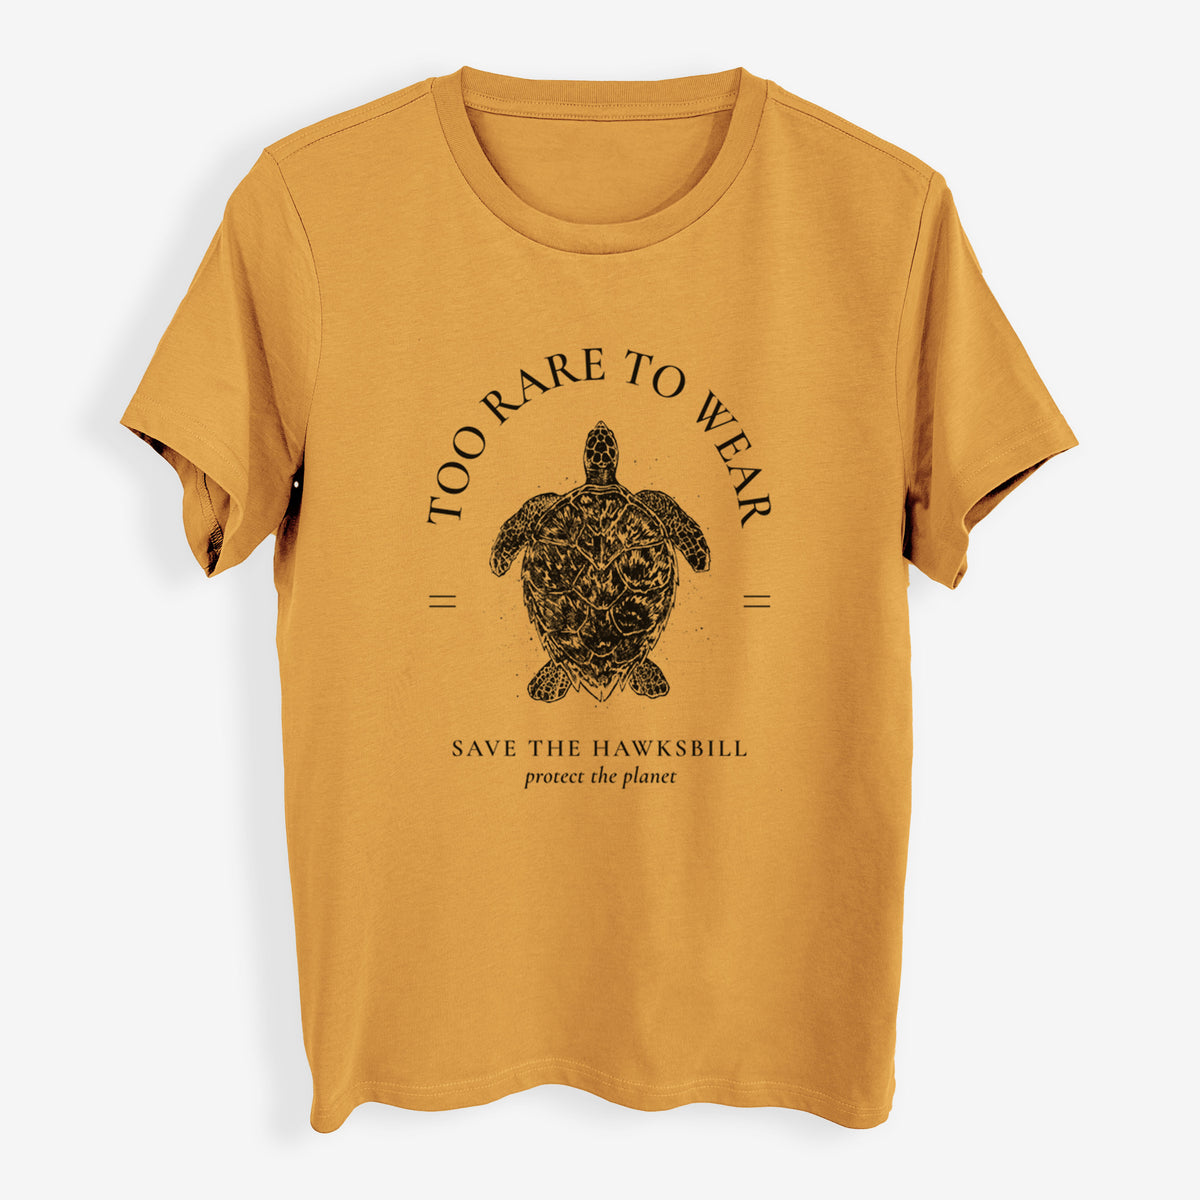 Too Rare to Wear - Save the Hawksbill - Womens Everyday Maple Tee